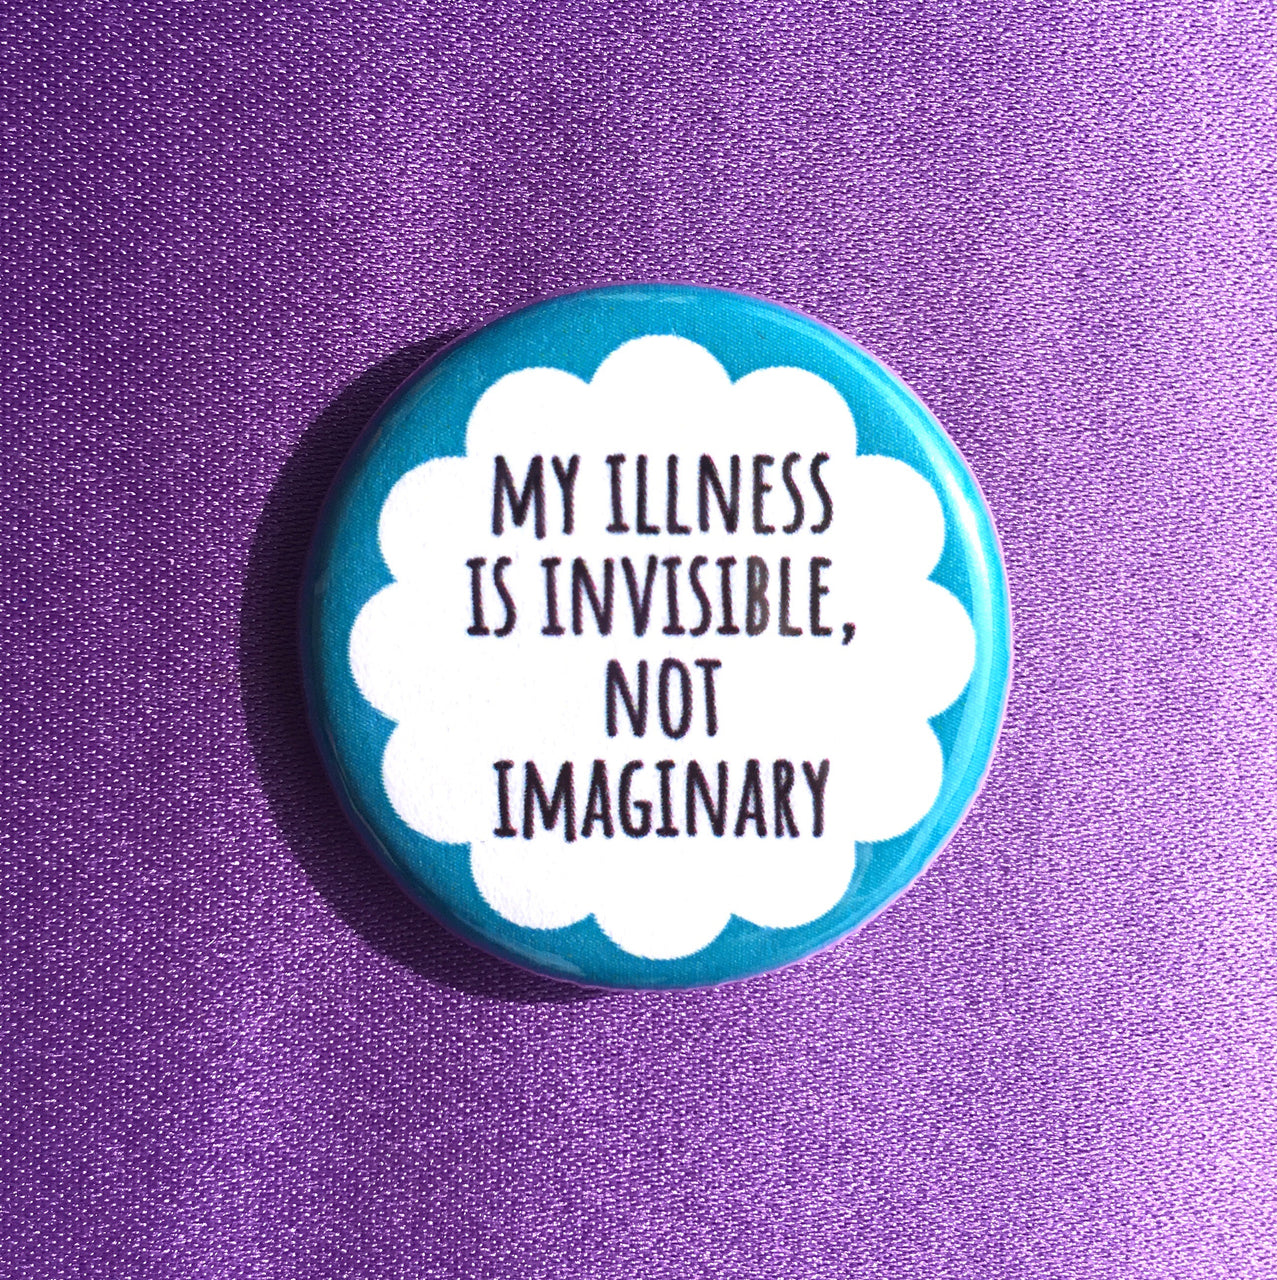 My illness is invisible not imaginary - Radical Buttons